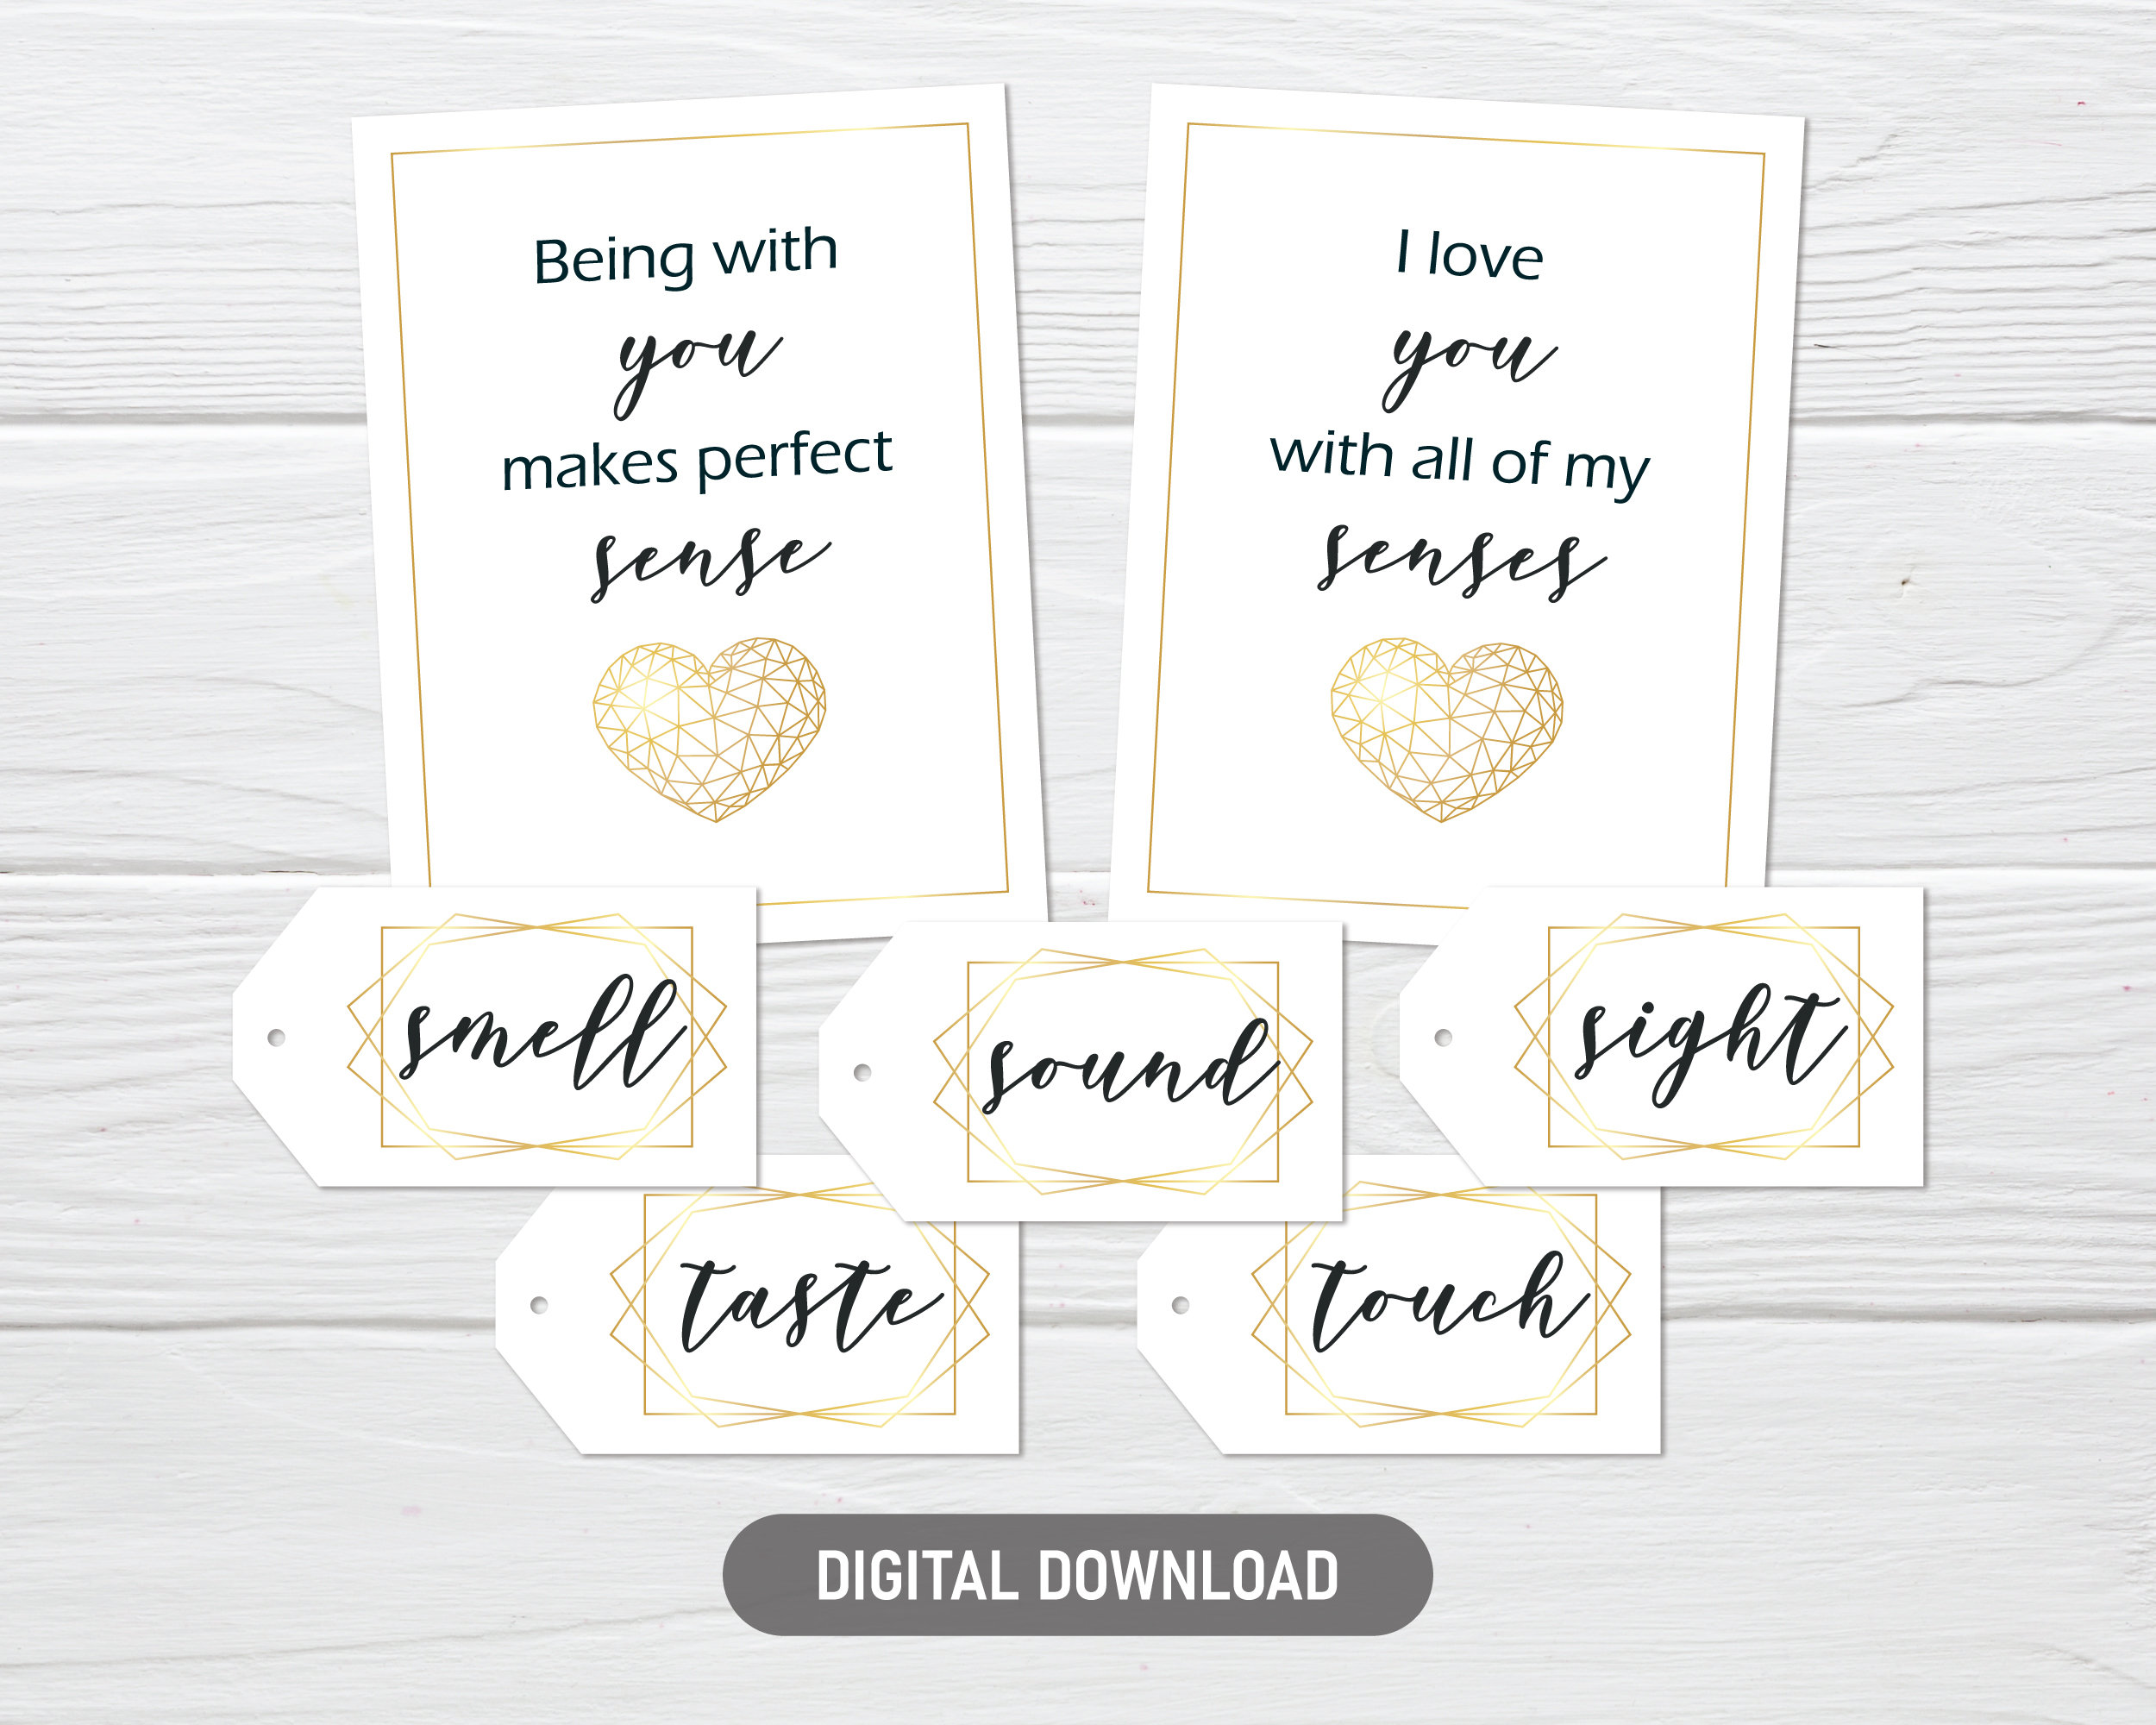 5 Senses Gift Tags & Anniversary Card. Instant Download Printable